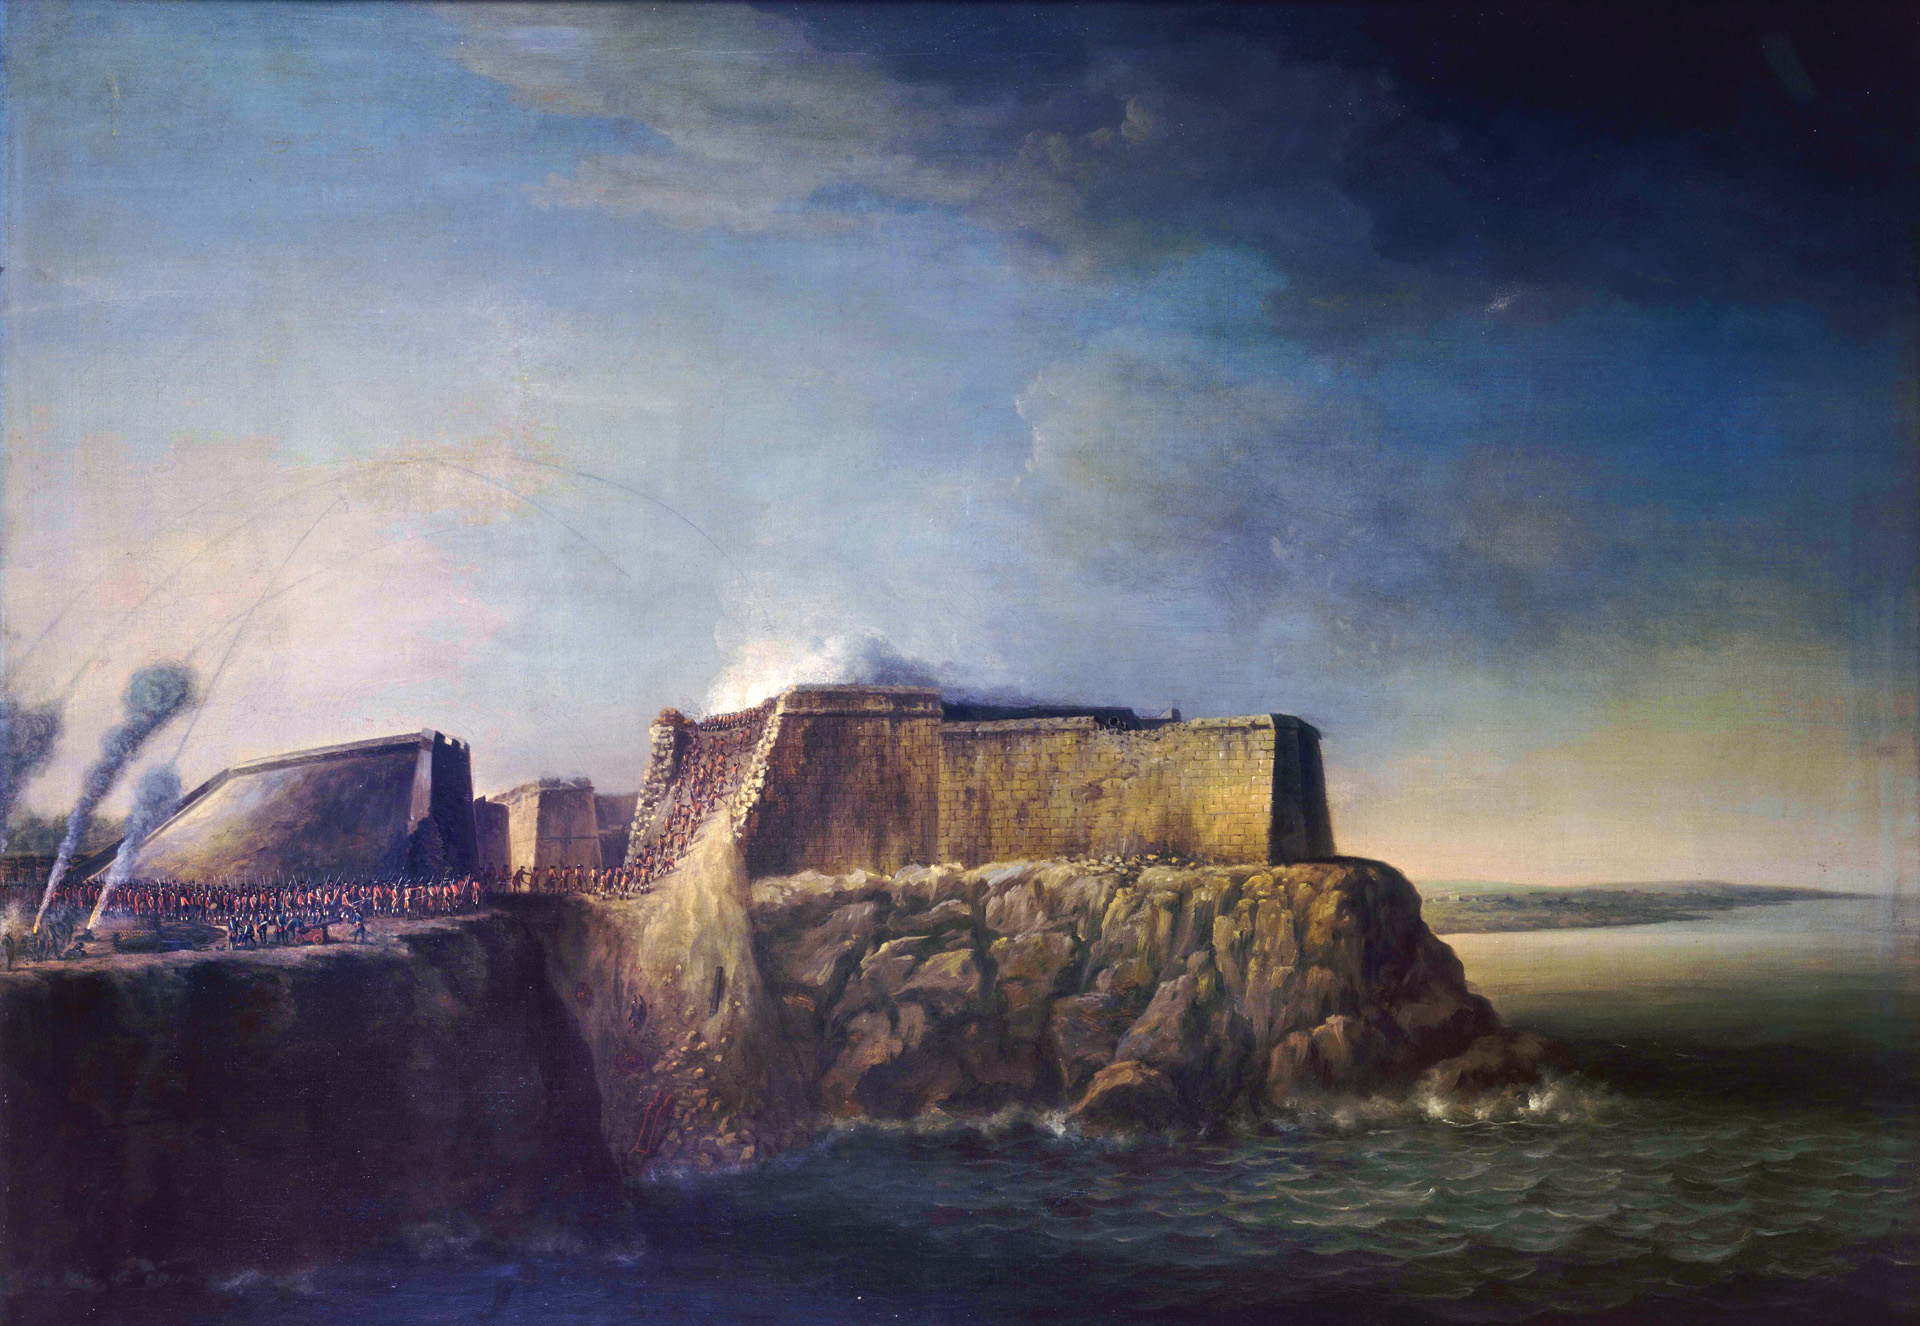 British redcoats storm the crumbling rampart of  El Morro Castle. The Royal Scots formed the forlorn hope and were followed by regulars carrying assault ladders, marksmen, sappers, and lastly the main assault force. 